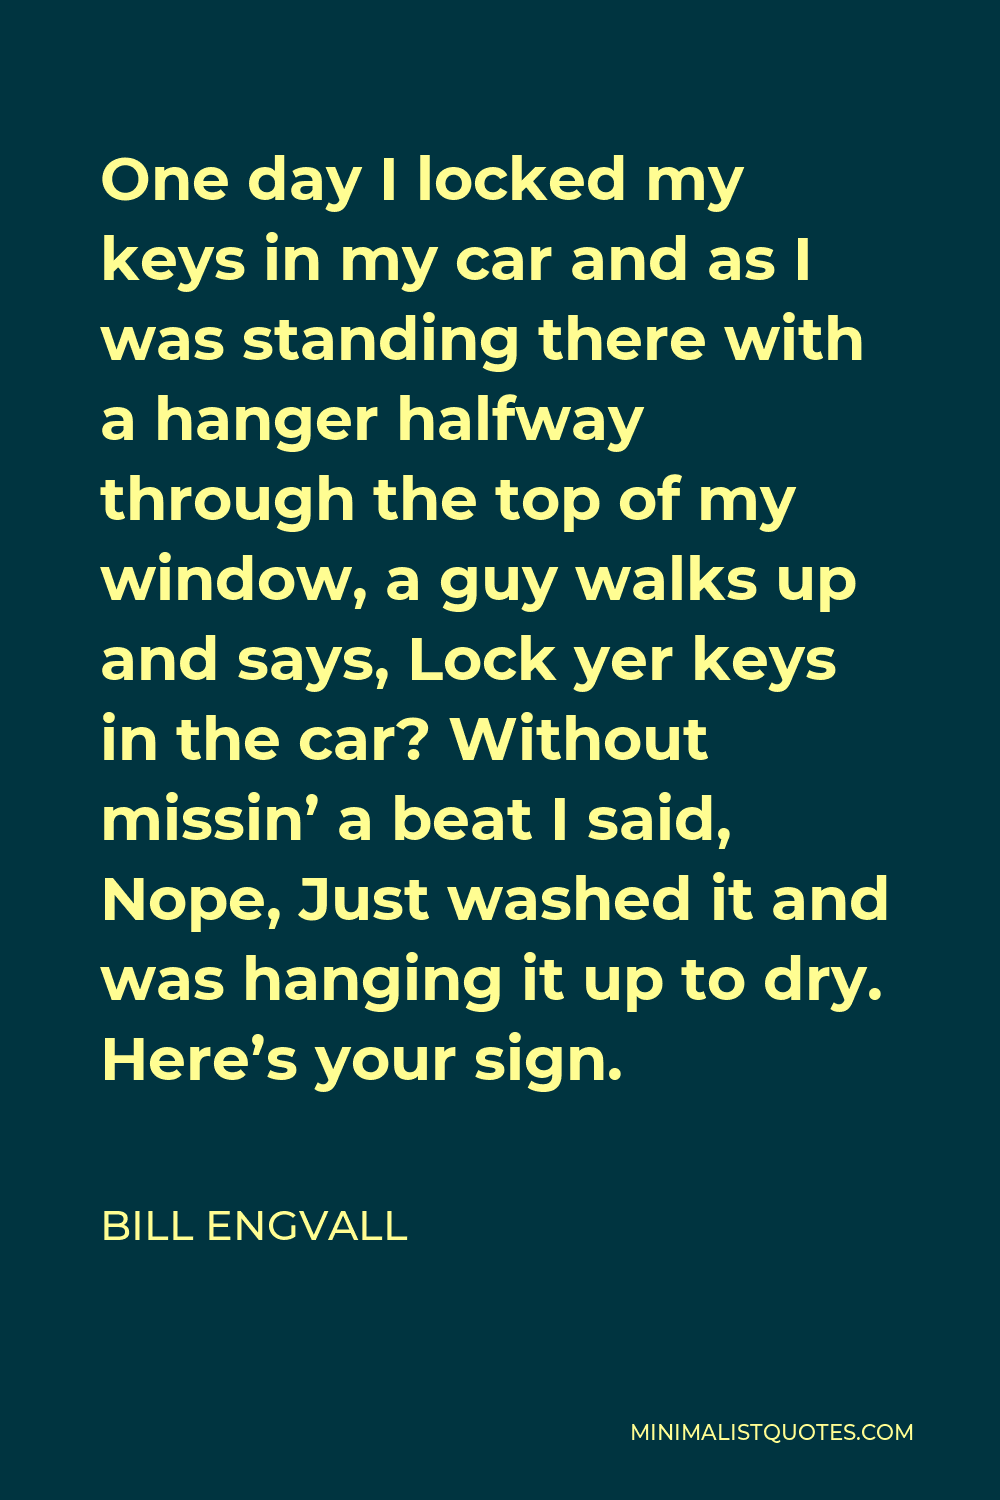 Bill Engvall Quote - One day I locked my keys in my car and as I was standing there with a hanger halfway through the top of my window, a guy walks up and says, Lock yer keys in the car? Without missin’ a beat I said, Nope, Just washed it and was hanging it up to dry. Here’s your sign.